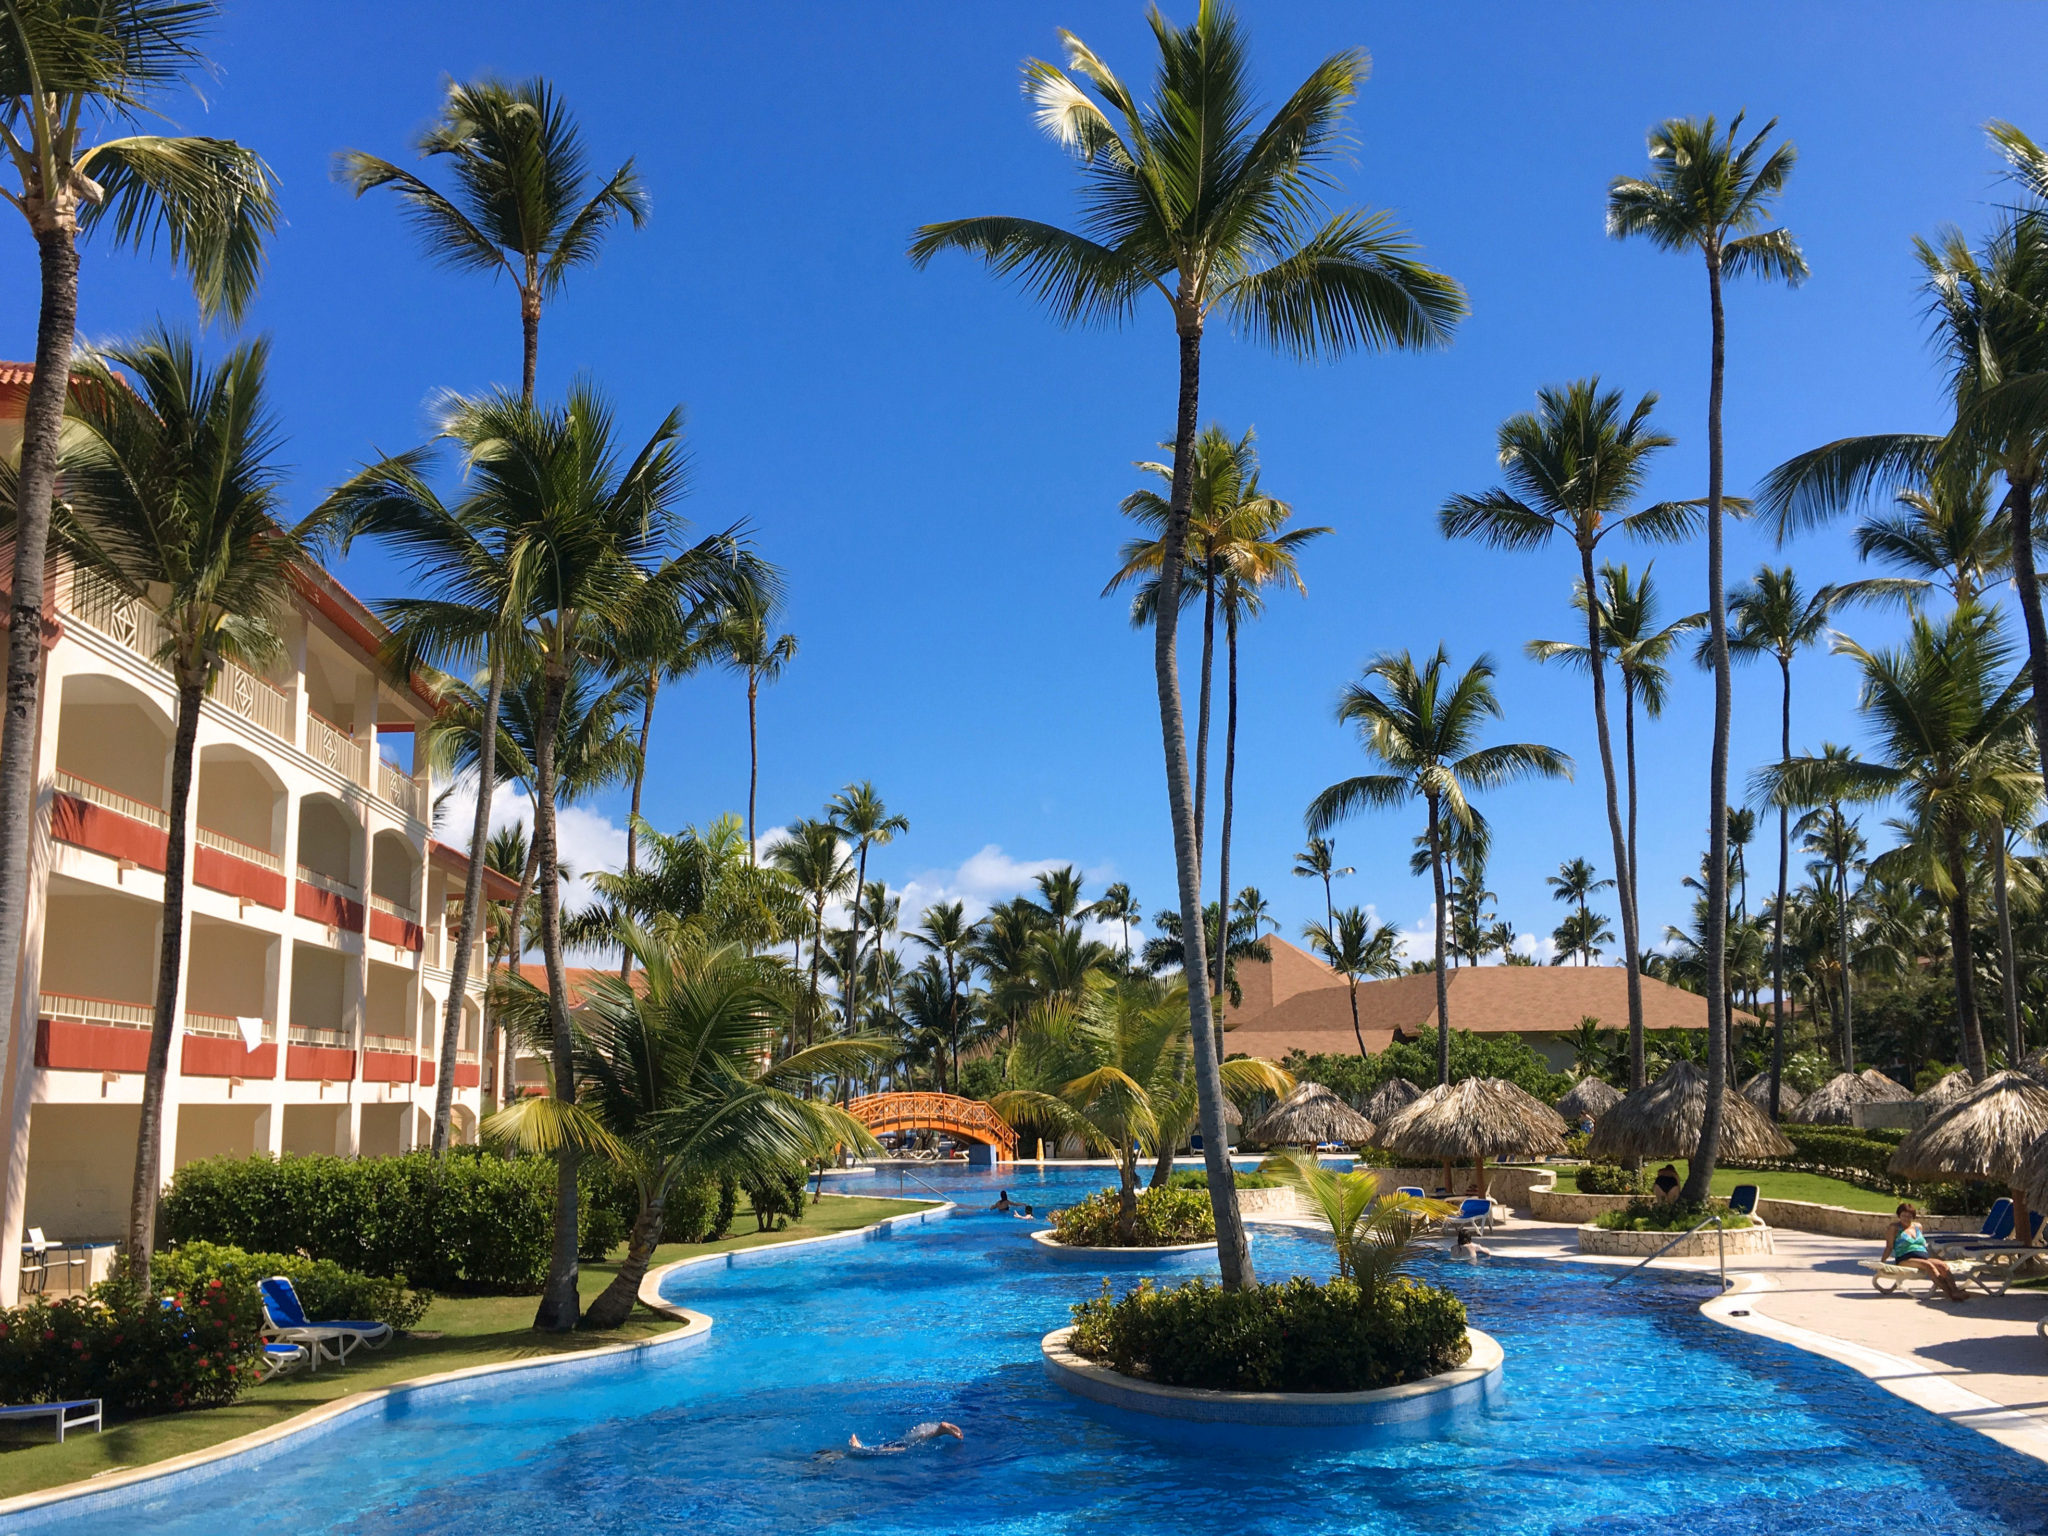 The swimming pool at Majestic Colonial Punta Cana